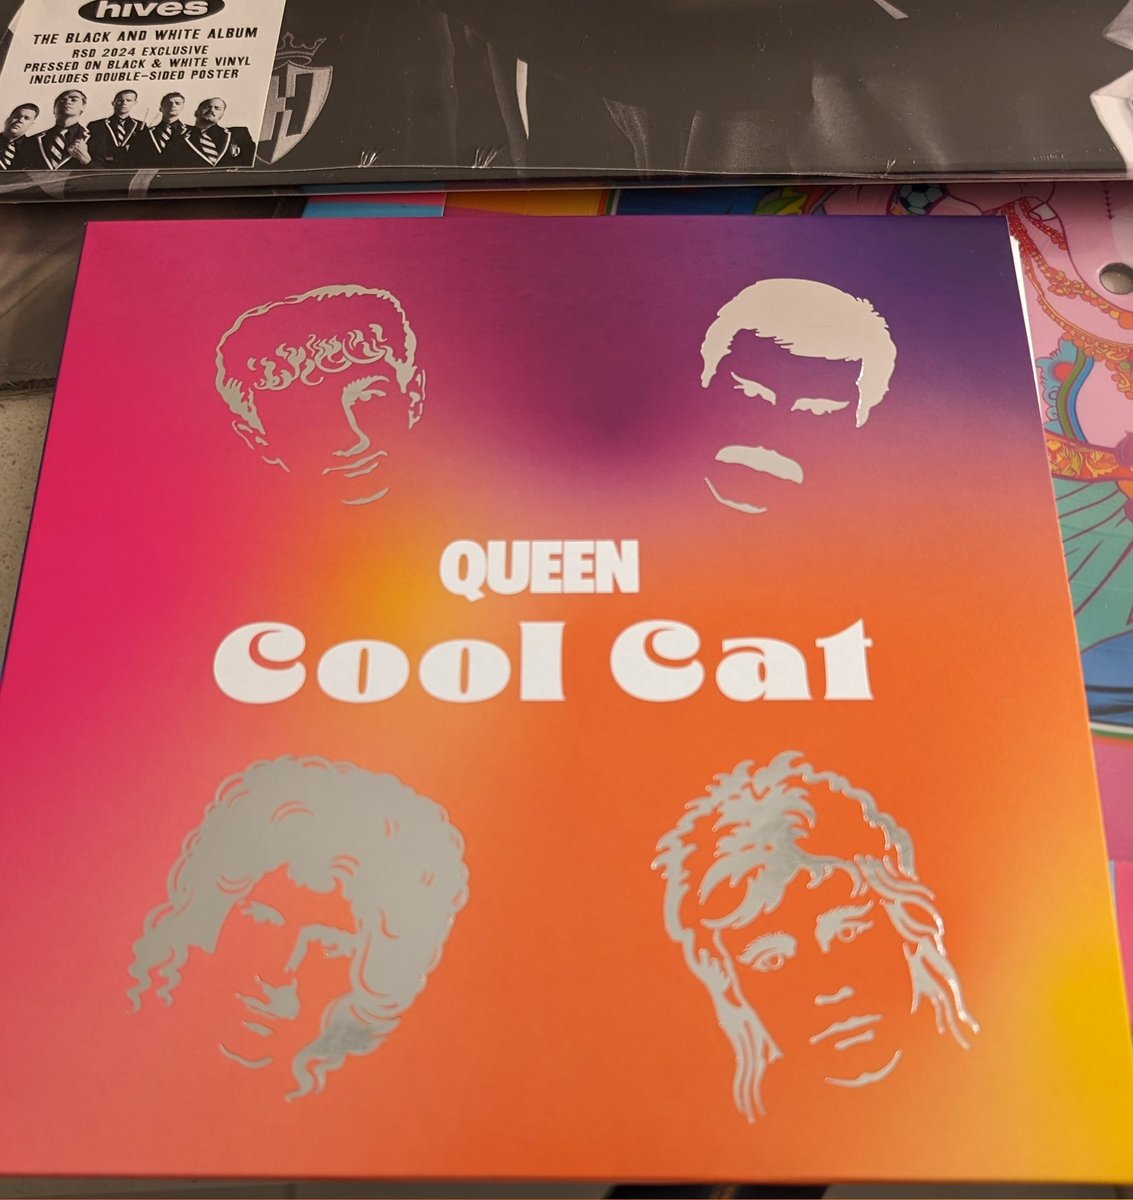 @OIQFC His finest vocal from one of their finest albums. Yes I'm right about that. #RecordStoreDay2024